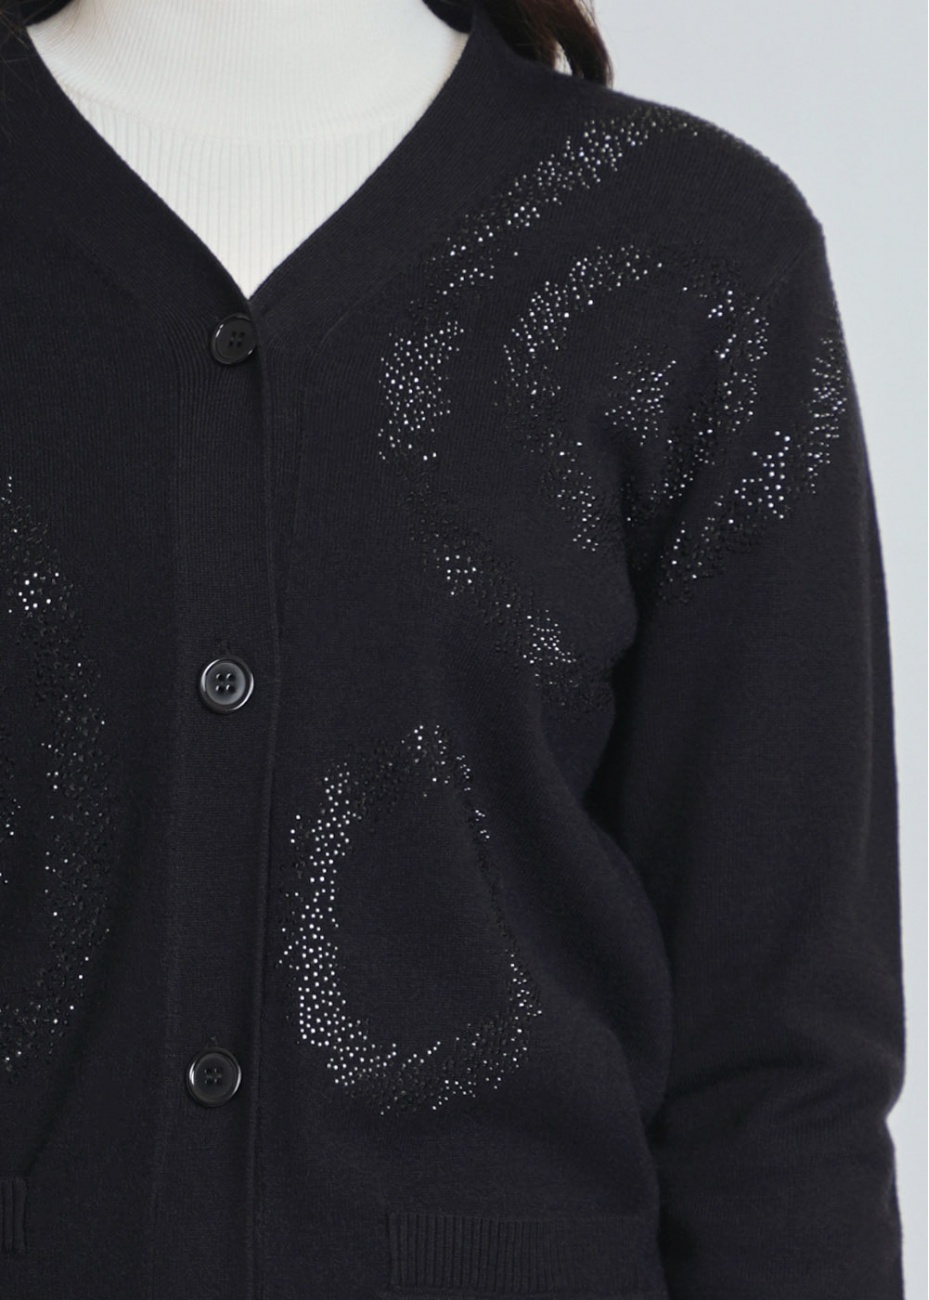 Shimmering Pattern: Black Cardigan with Glossy Accents